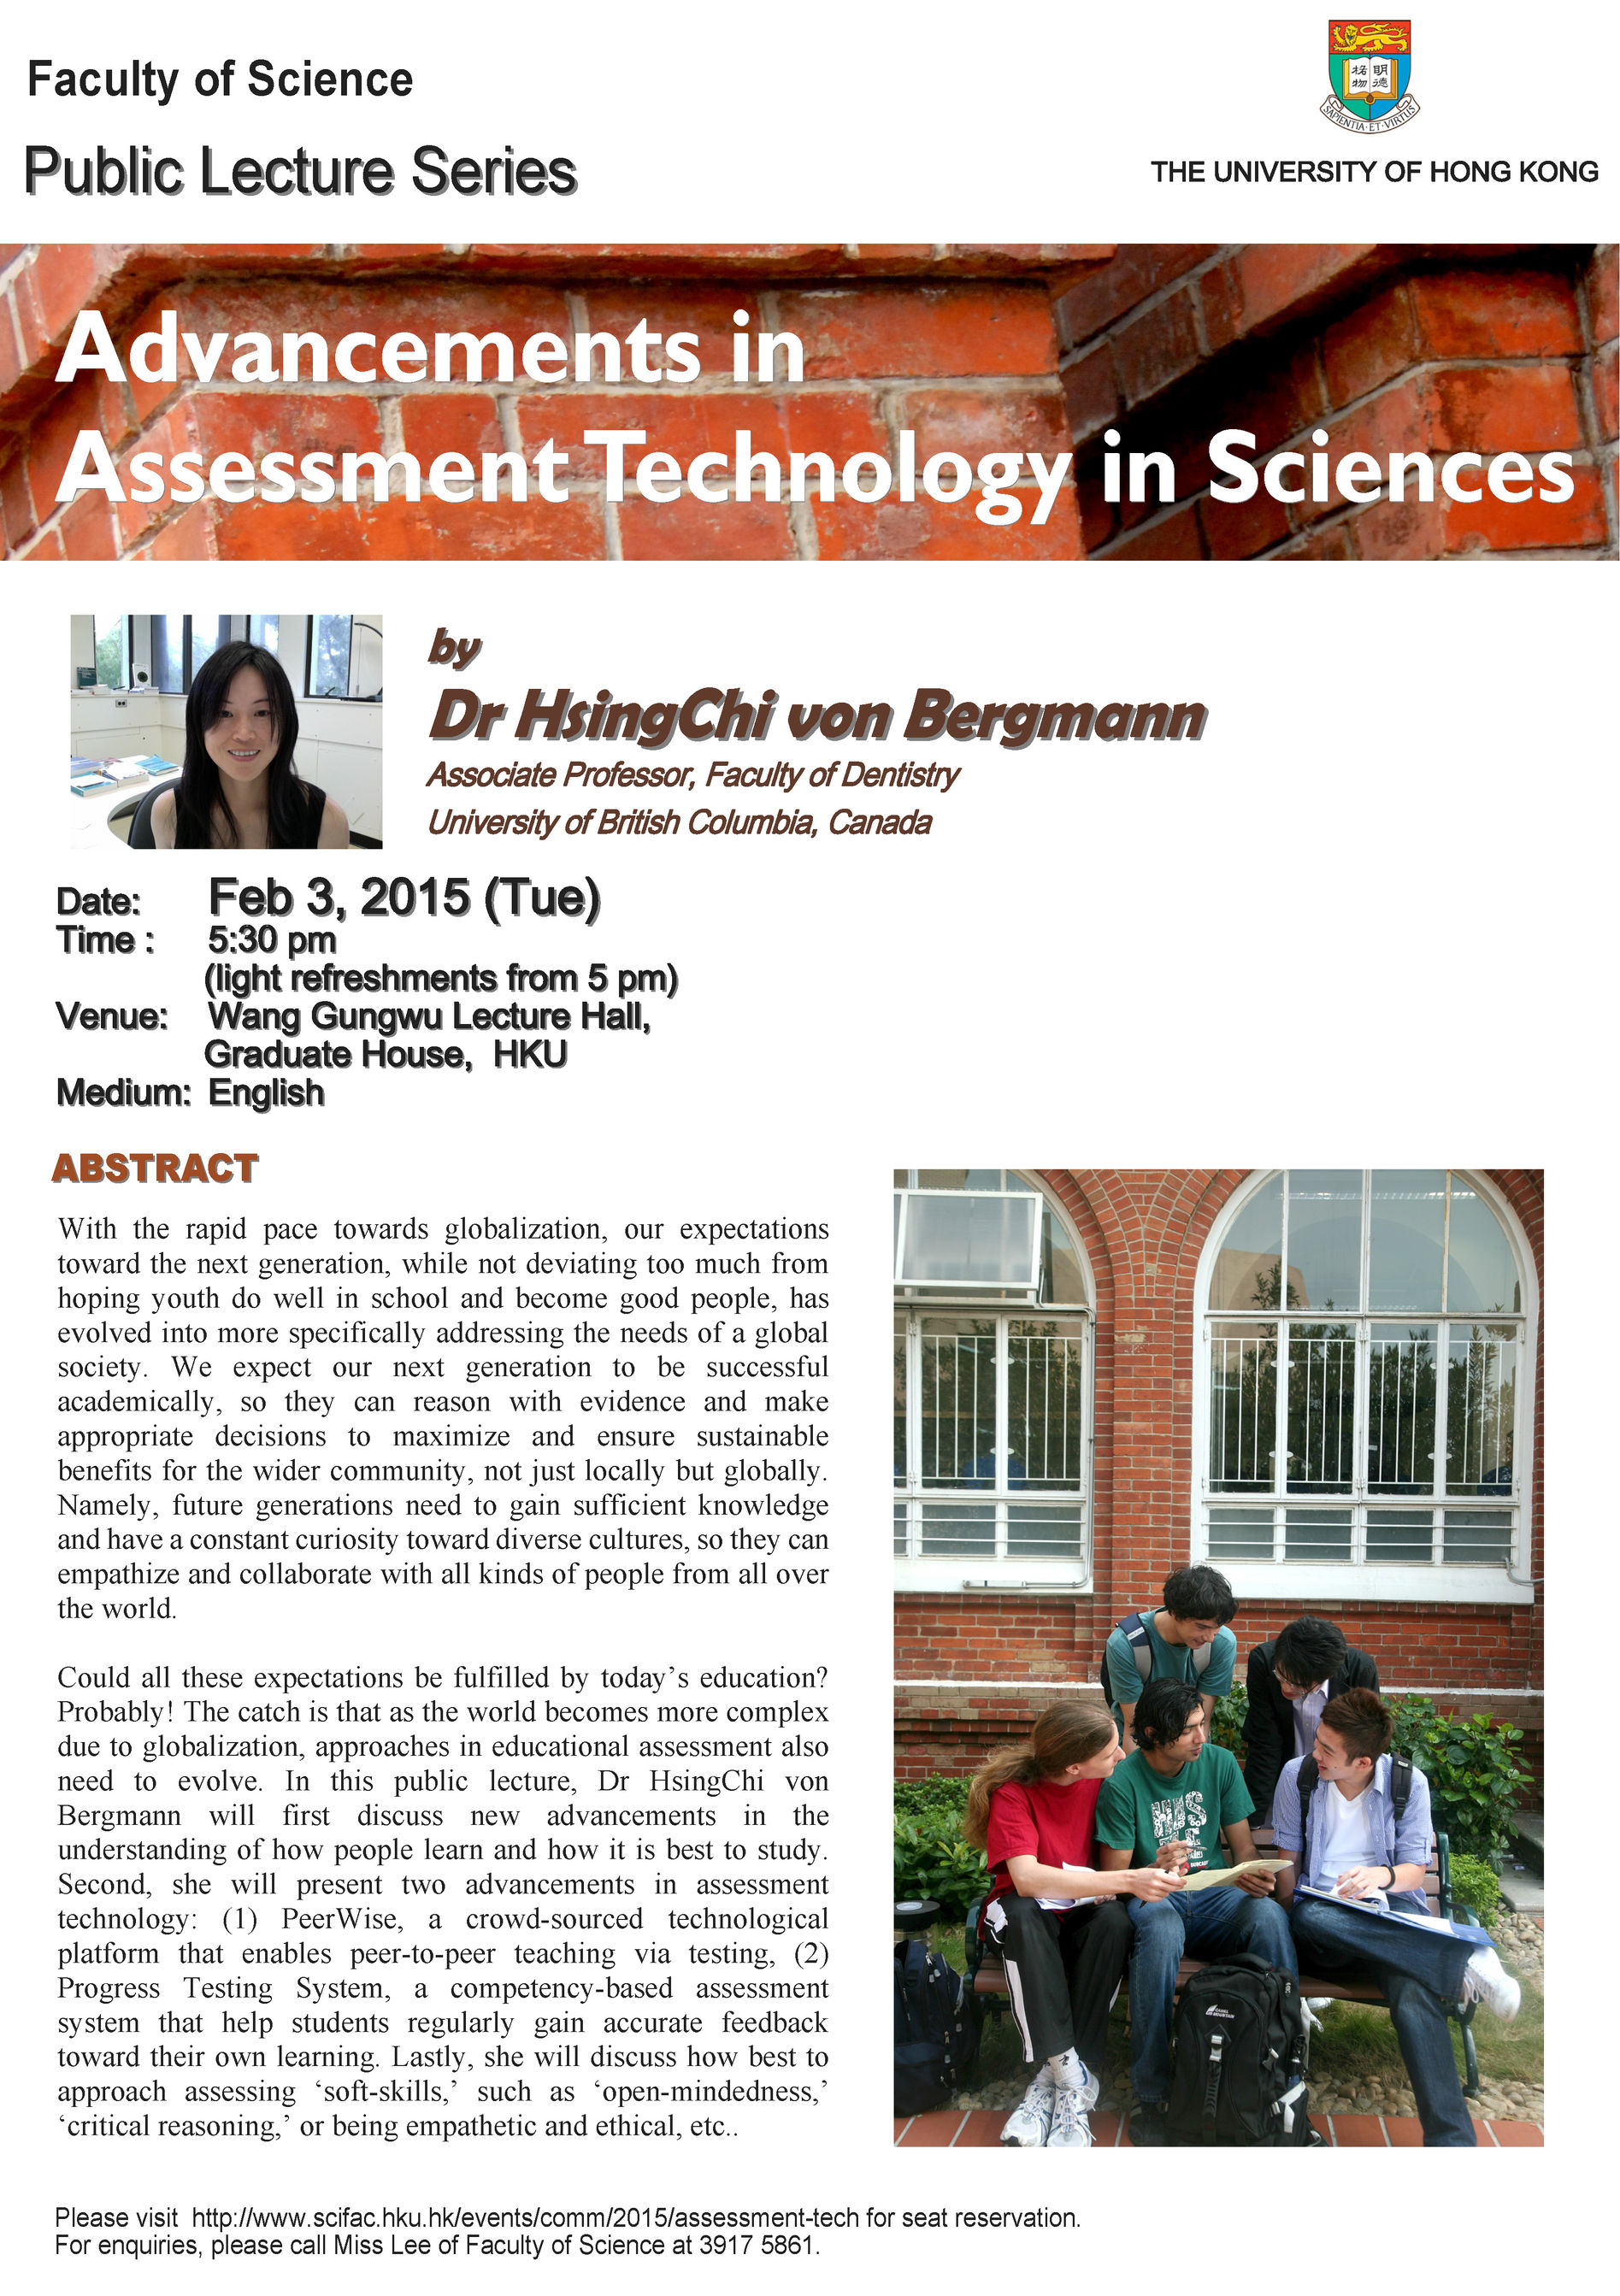 Public Lecture: Advancements in Assessment Technology in Sciences